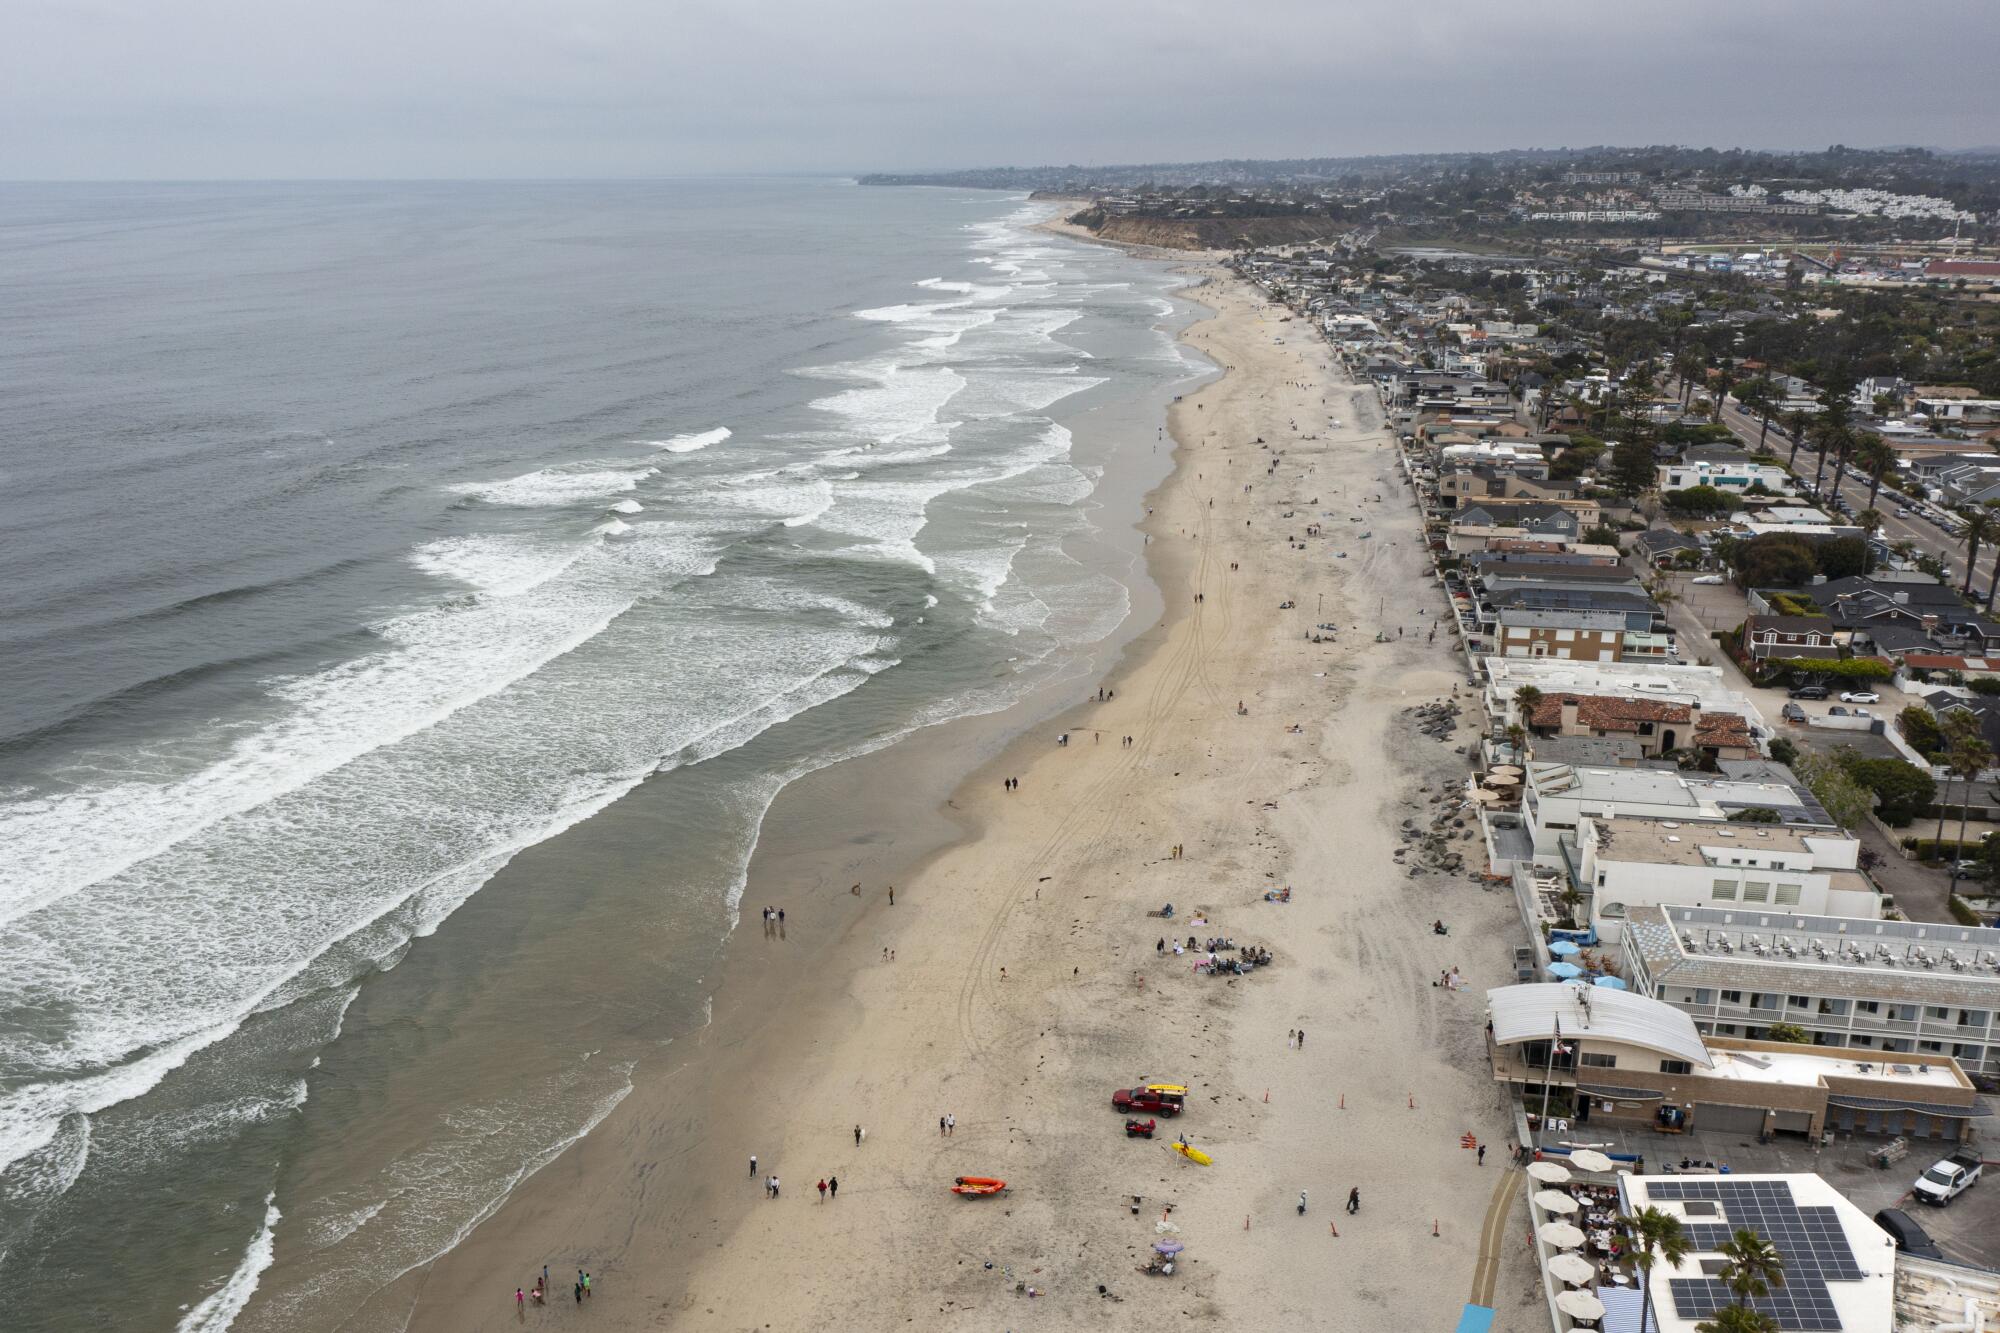 A 46-year-old swimmer was bitten by a shark about 100 yards offshore from the main Del Mar.